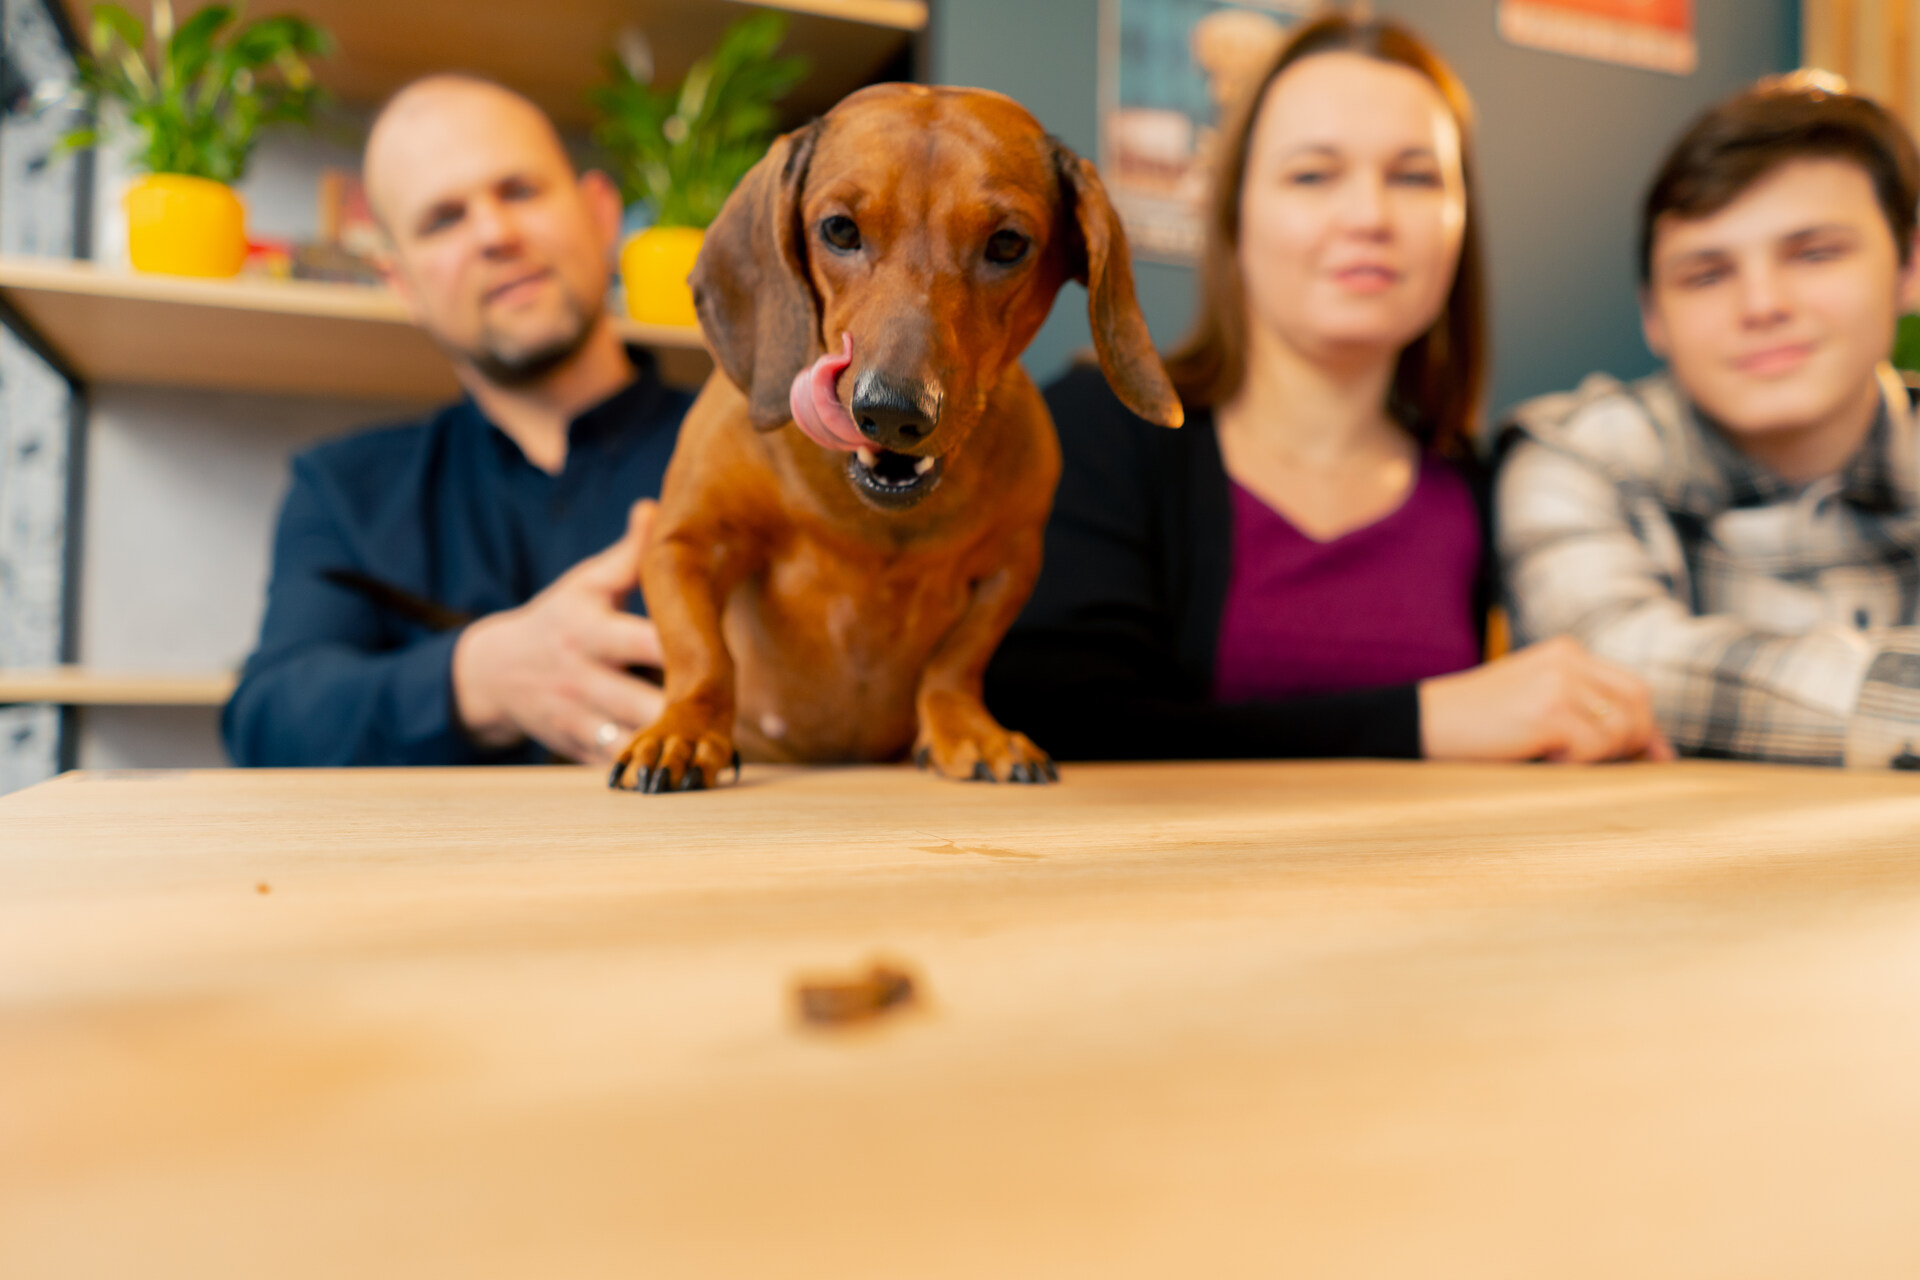 A dog reaching for food on a dining table